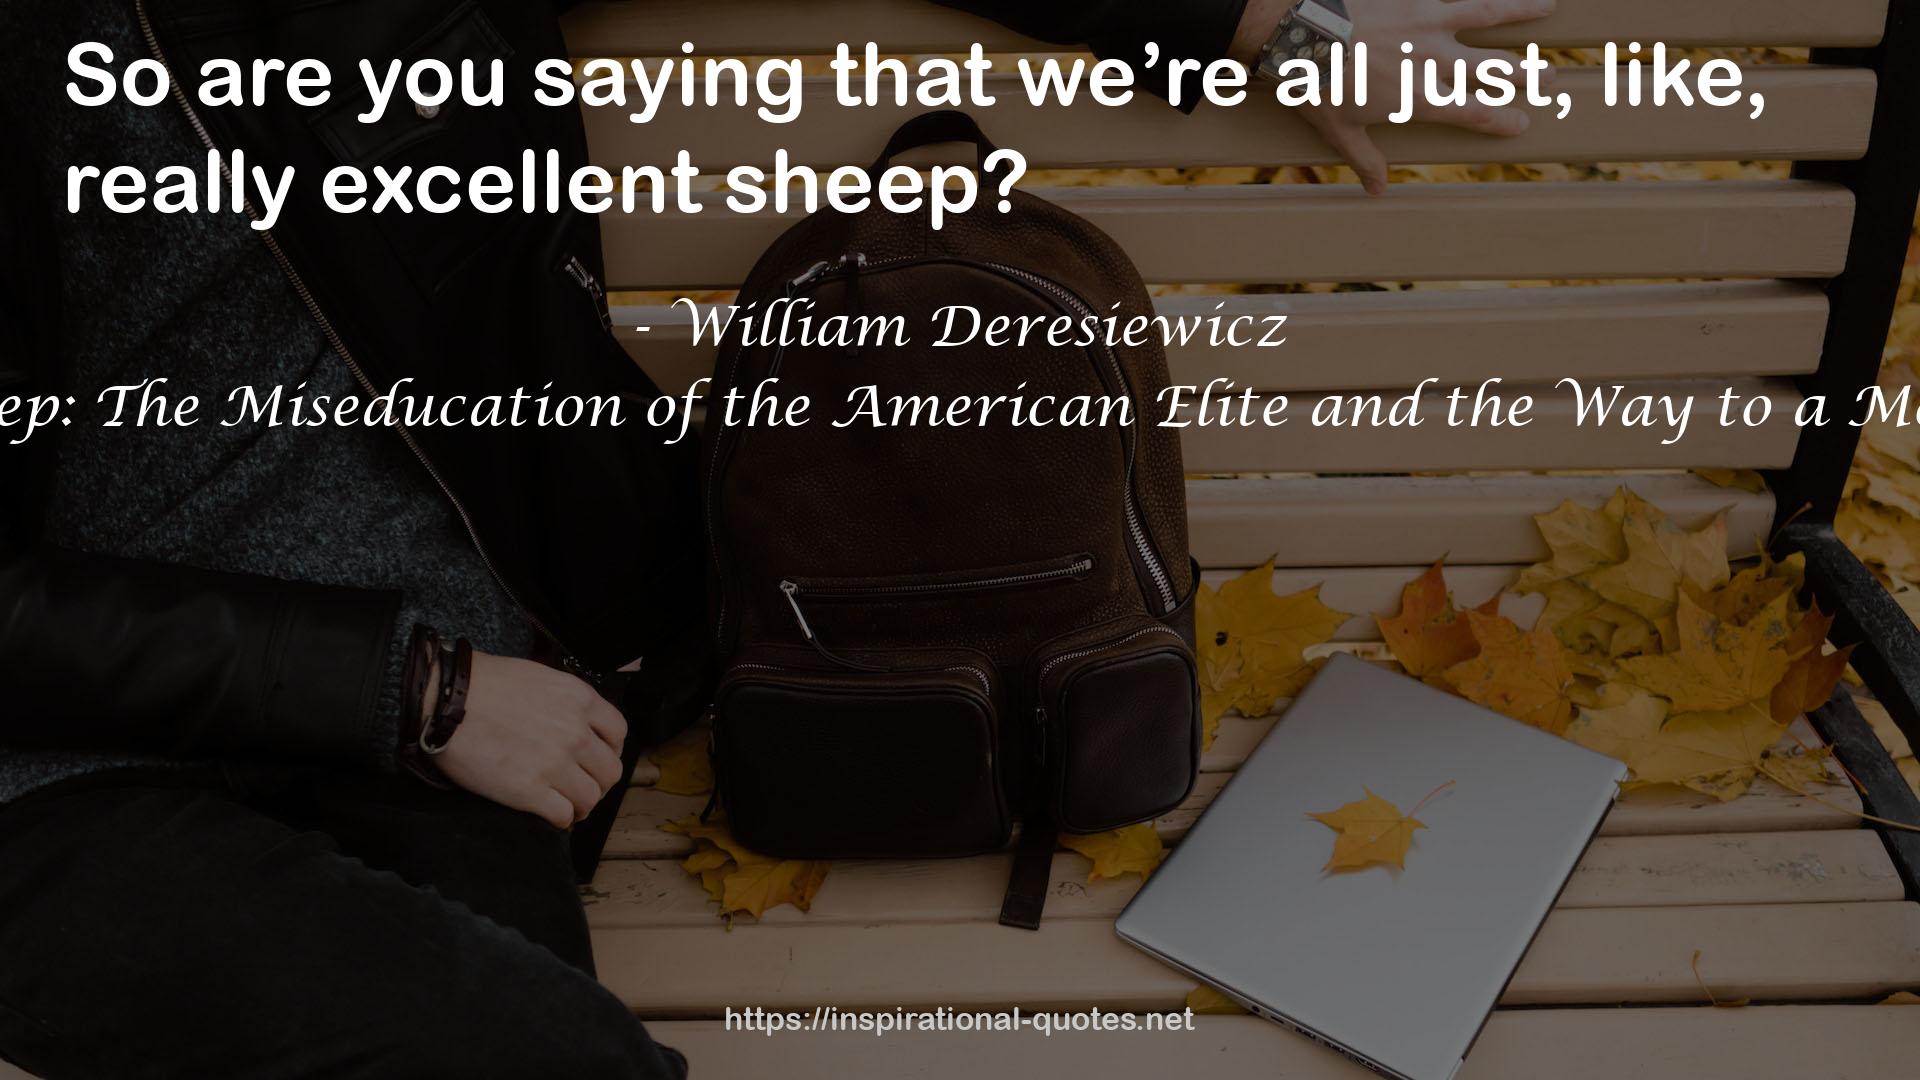 Excellent Sheep: The Miseducation of the American Elite and the Way to a Meaningful Life QUOTES